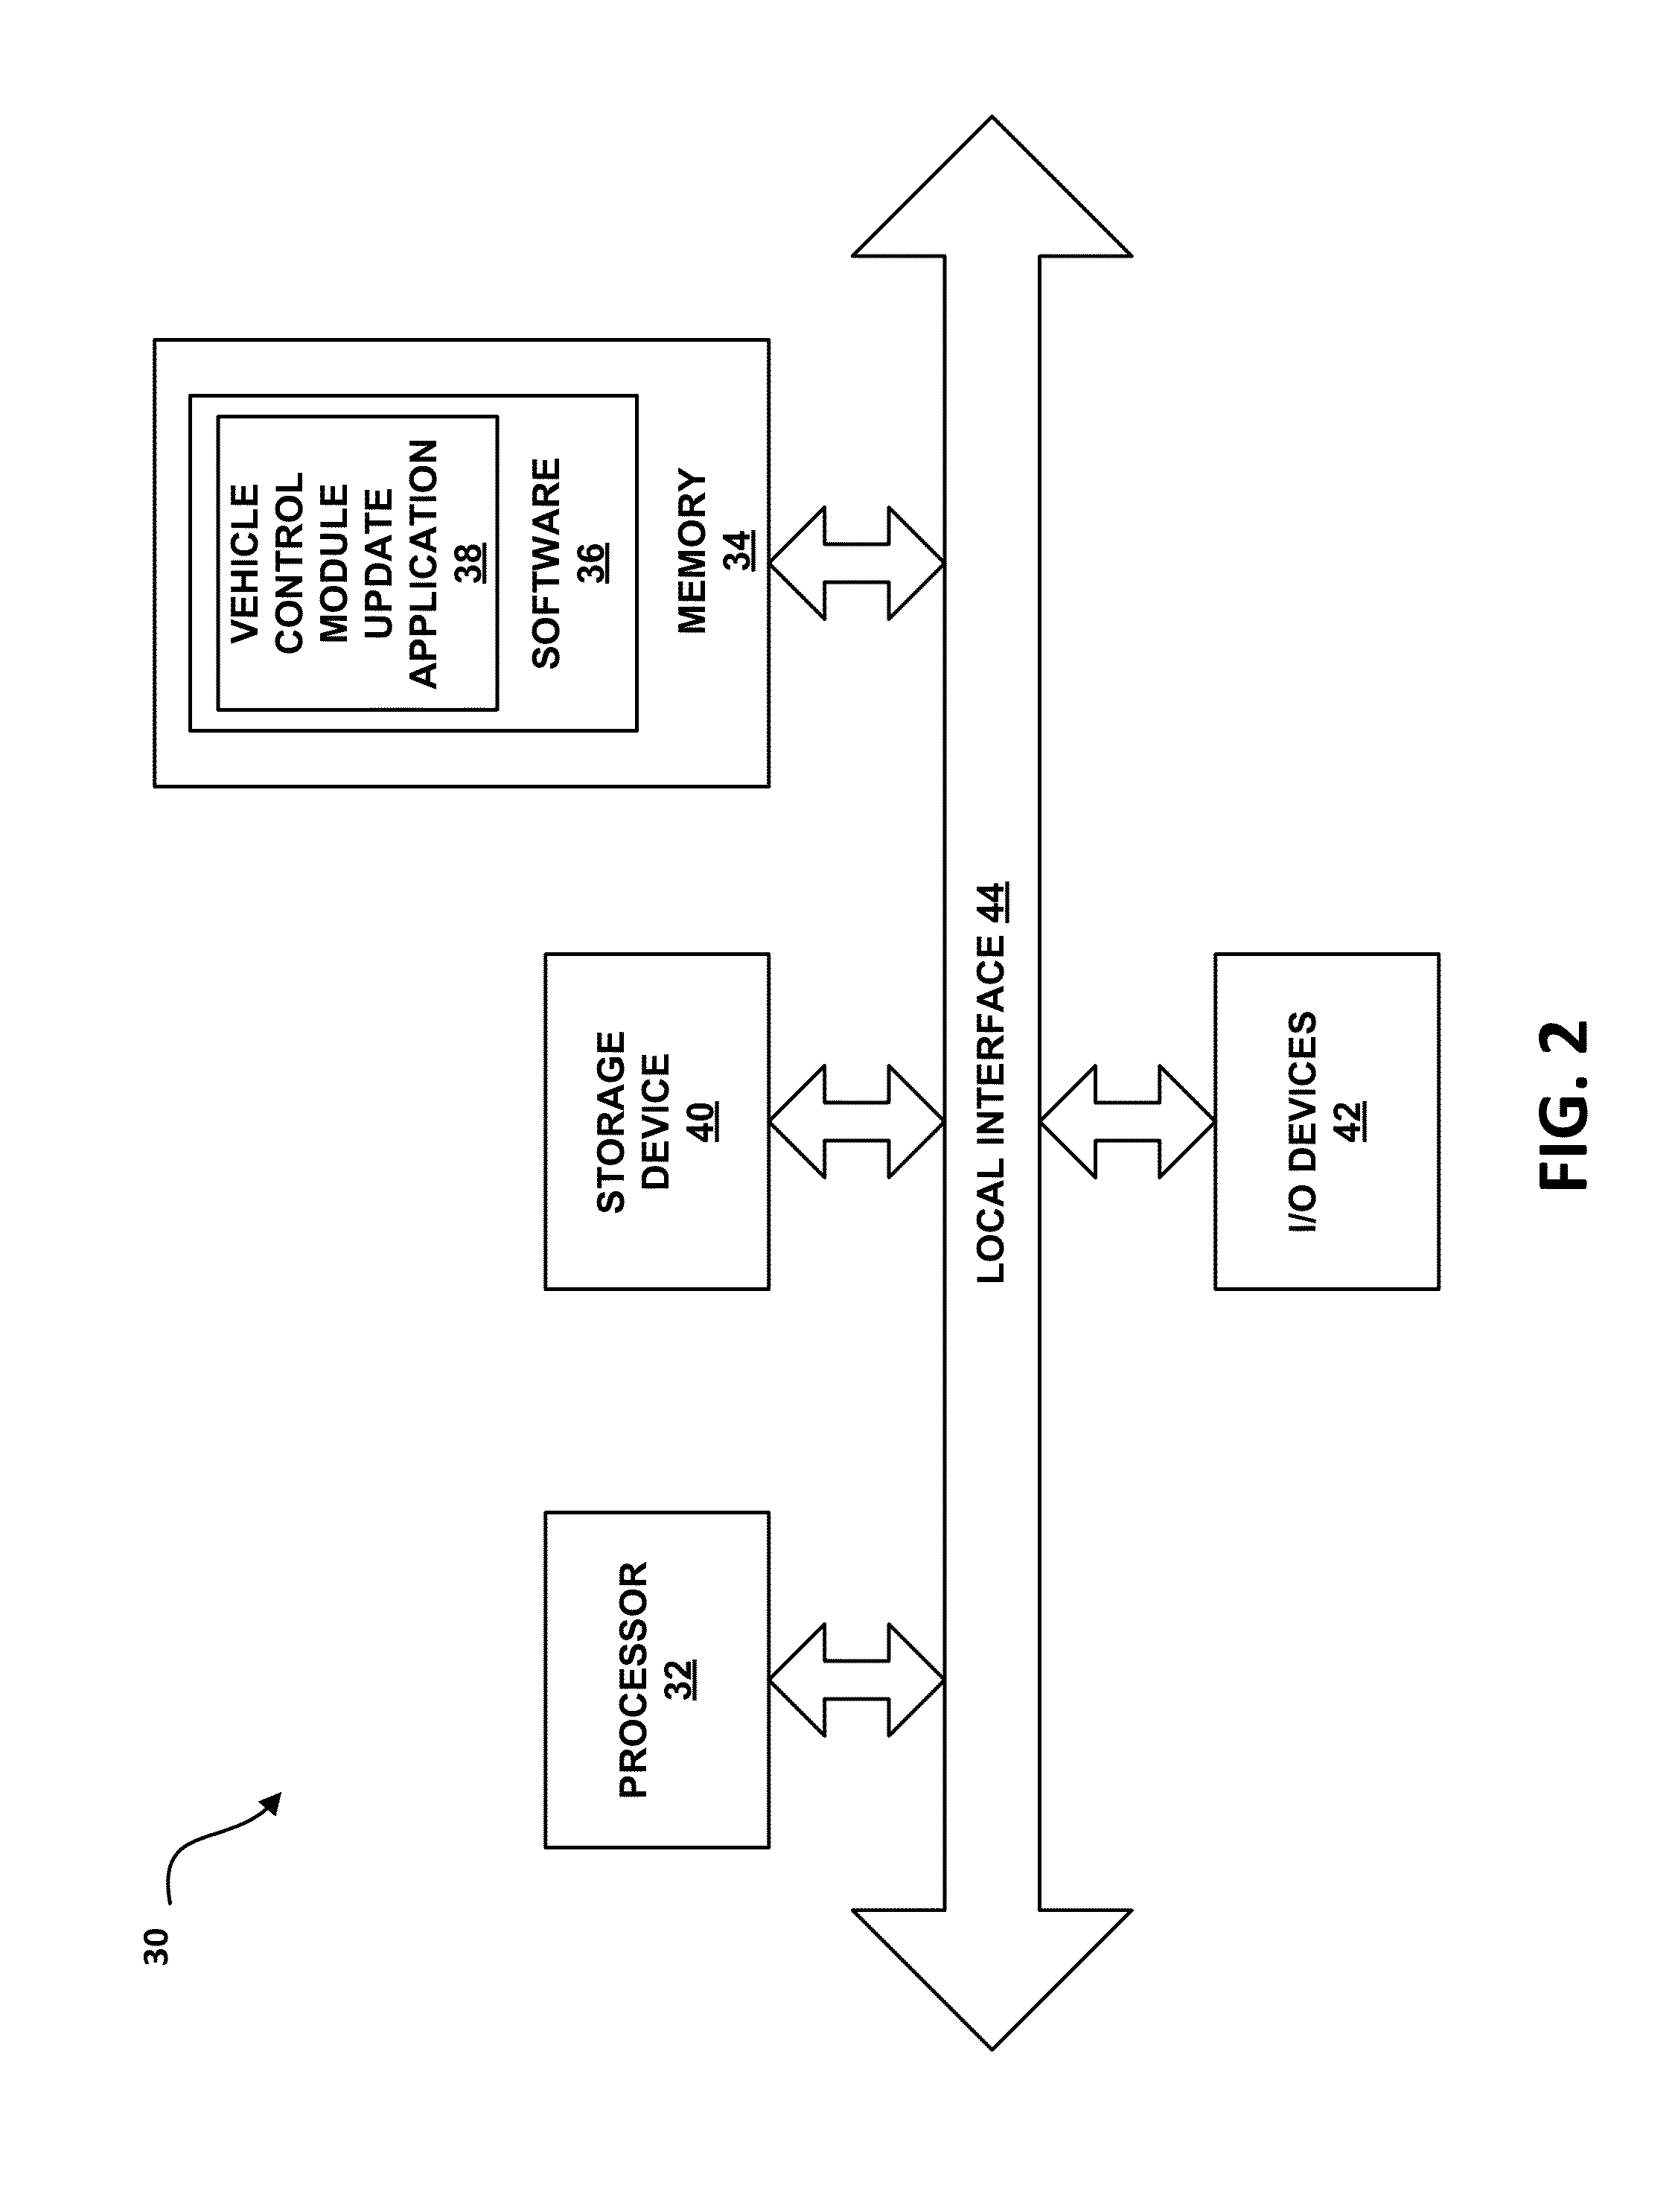 System and method for providing predictive software upgrades